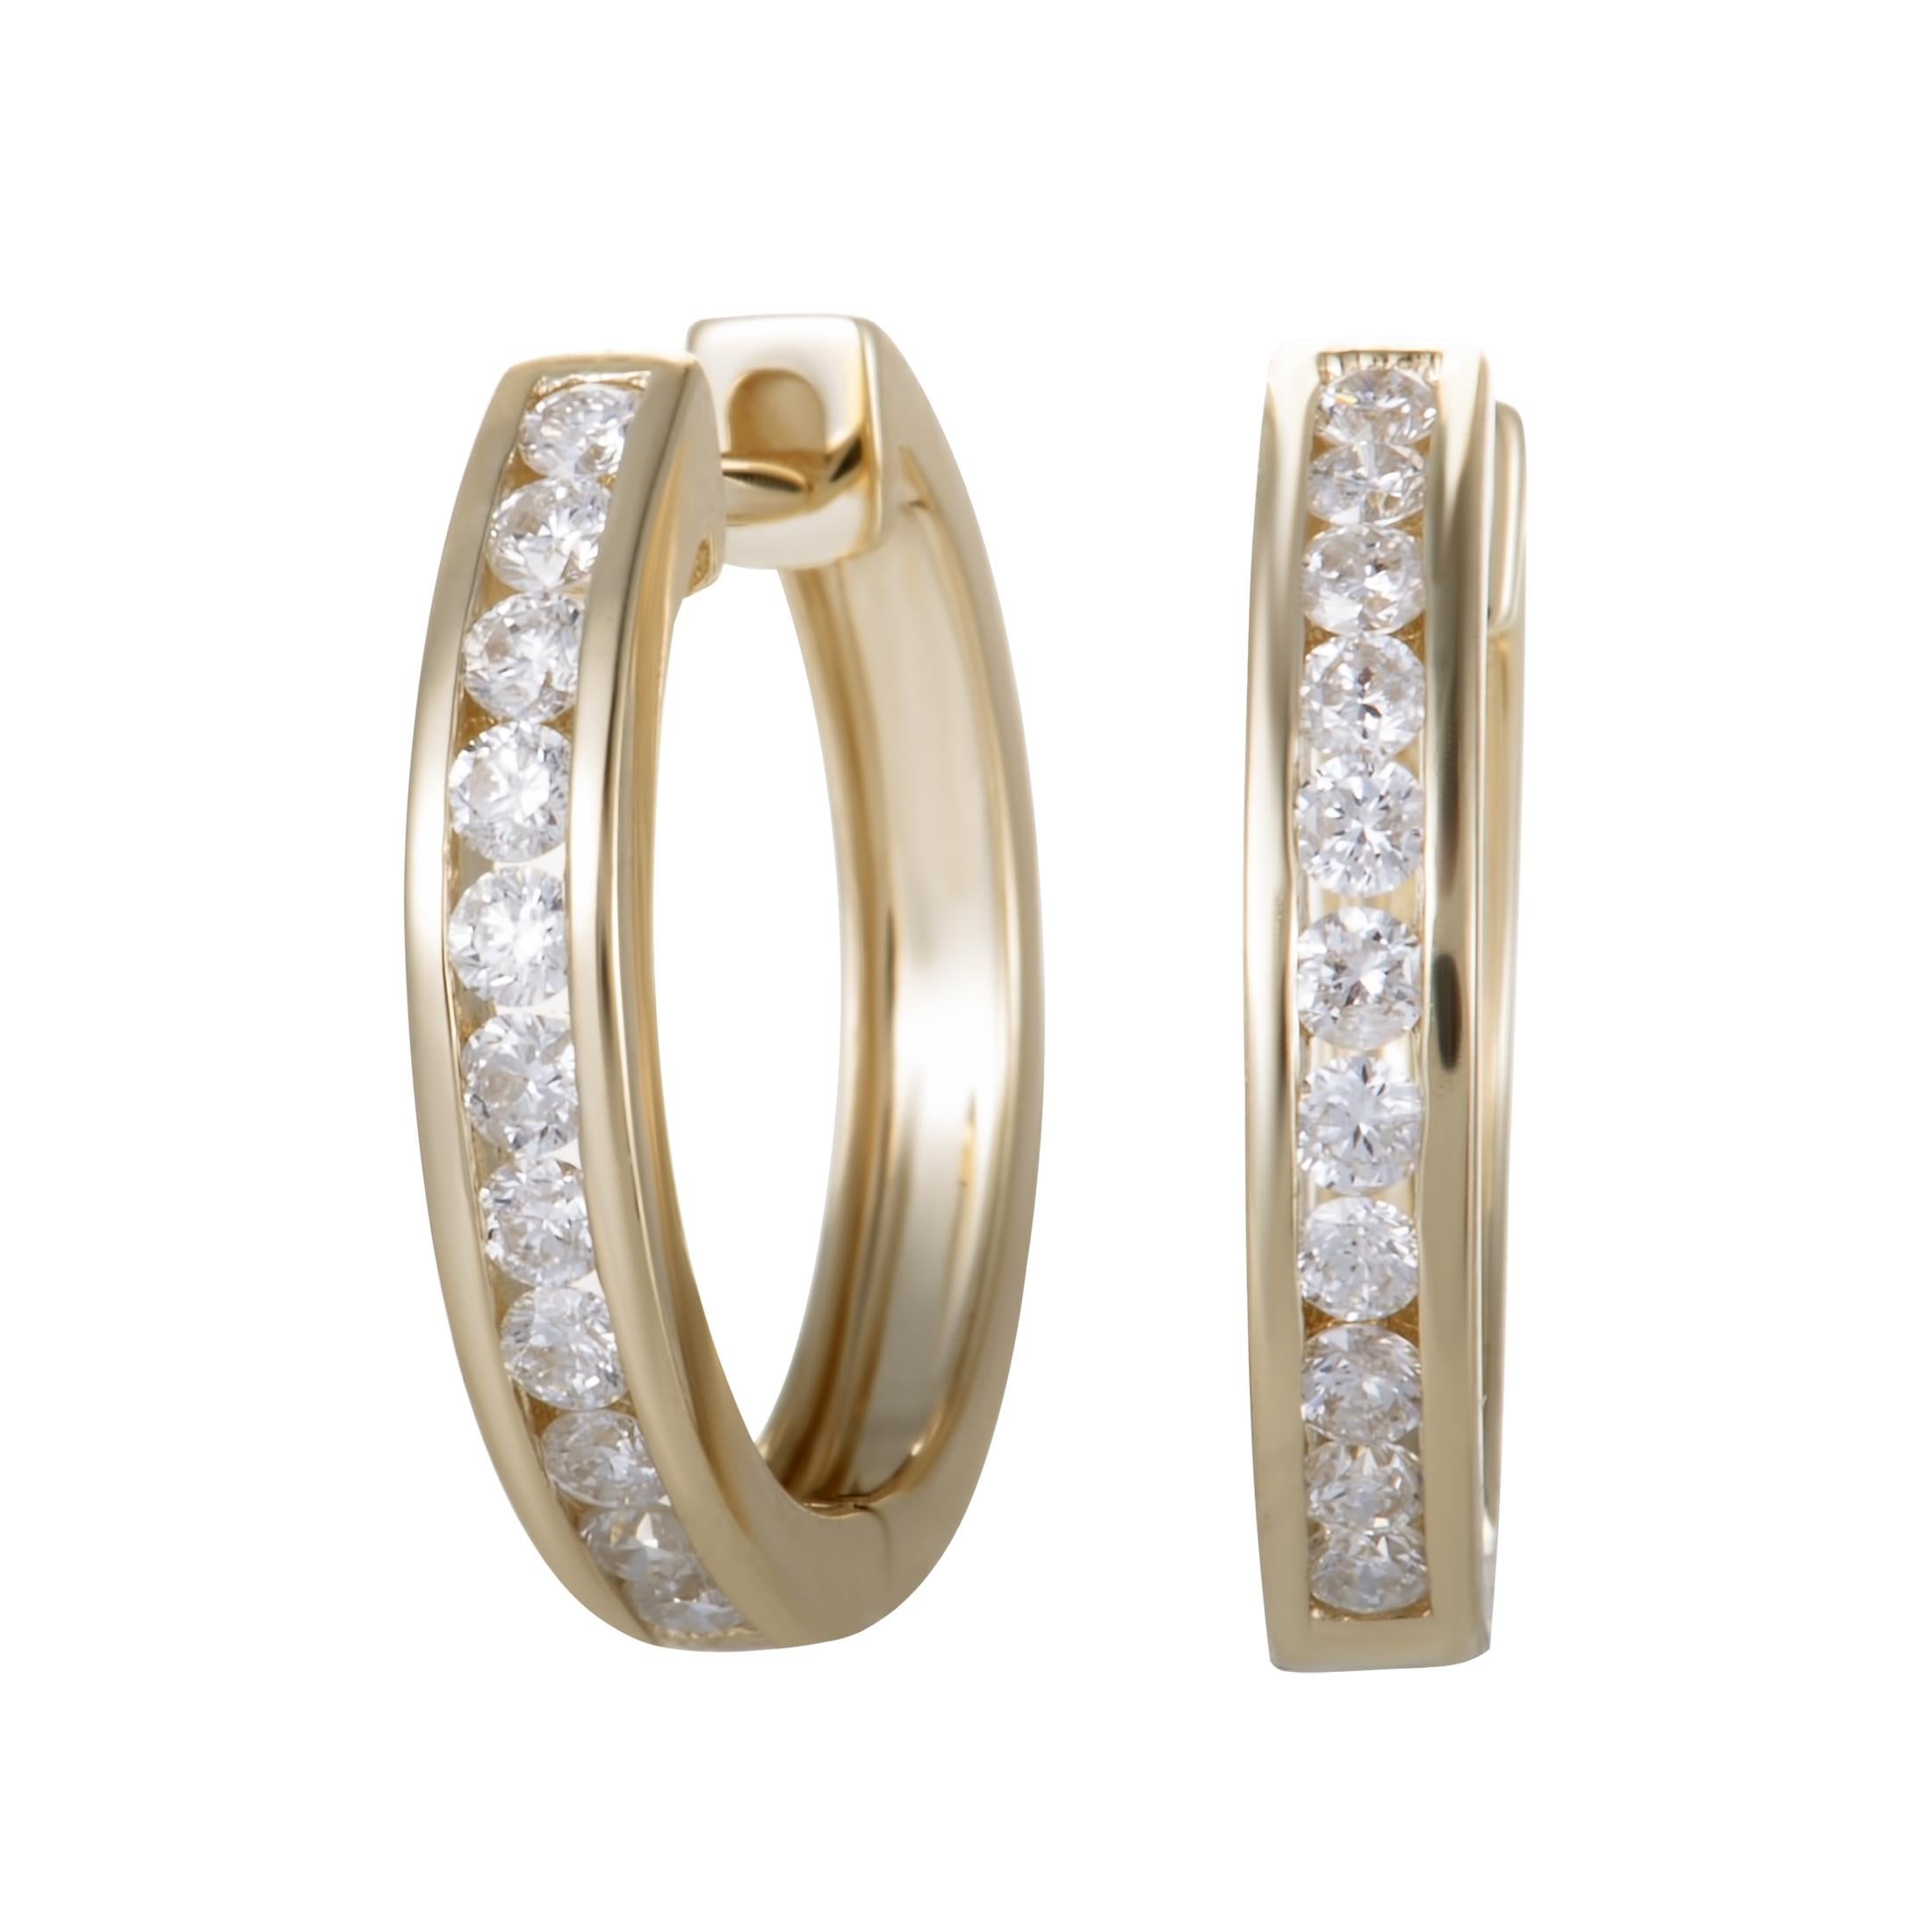 Combining the alluring radiance of 14K yellow gold with the glamorous brilliance of diamond stones, these lovely hoop earrings offer an exceptionally elegant look. The pair weighs 2.9 grams and the diamonds total 0.50 carats.